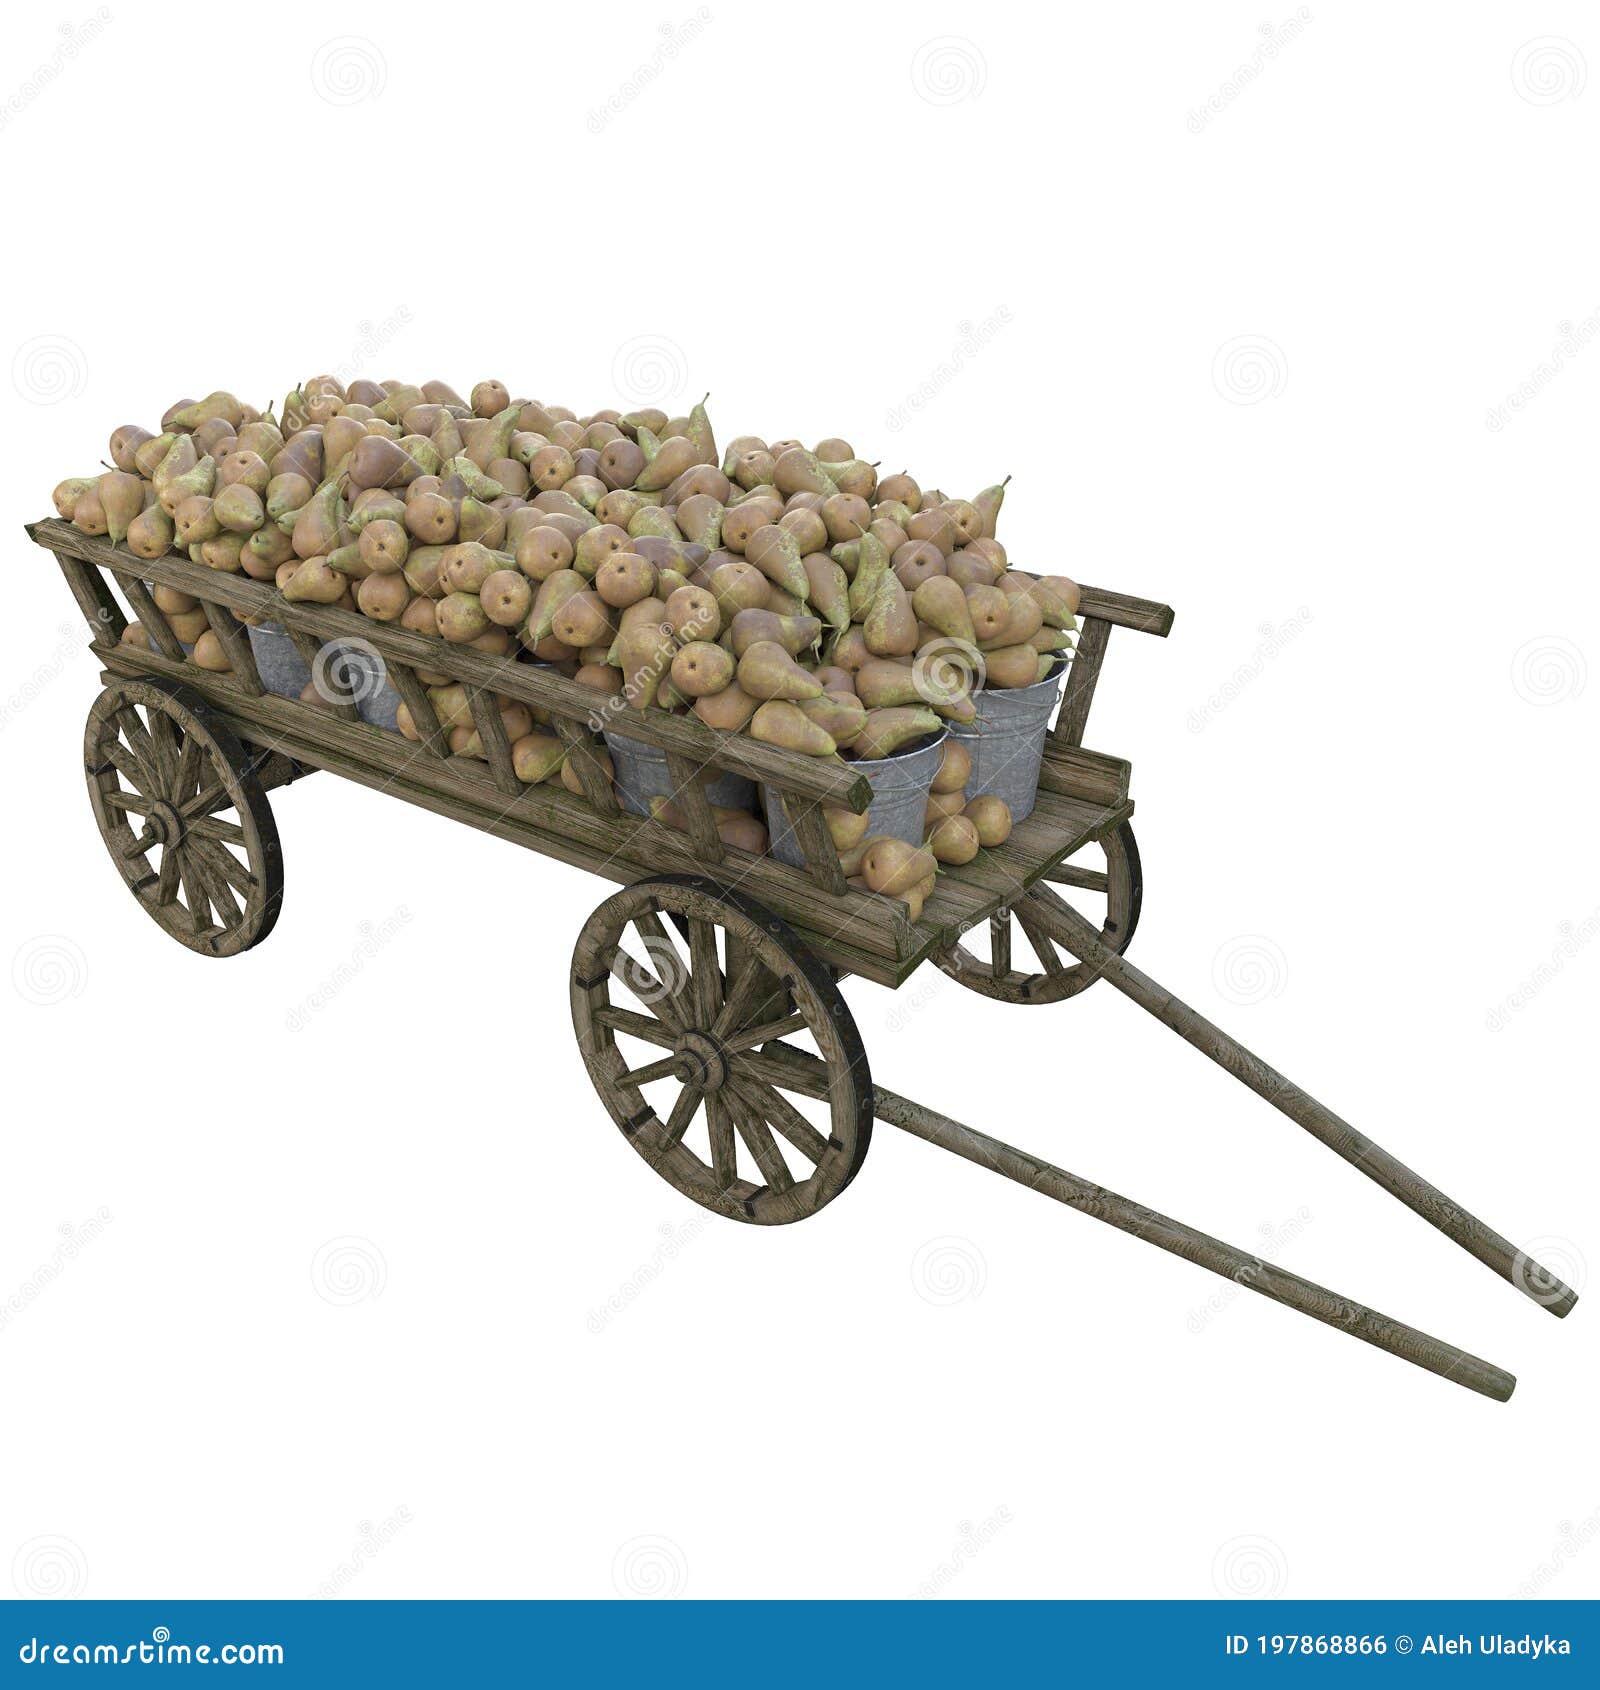 harvest pears in a wooden cart